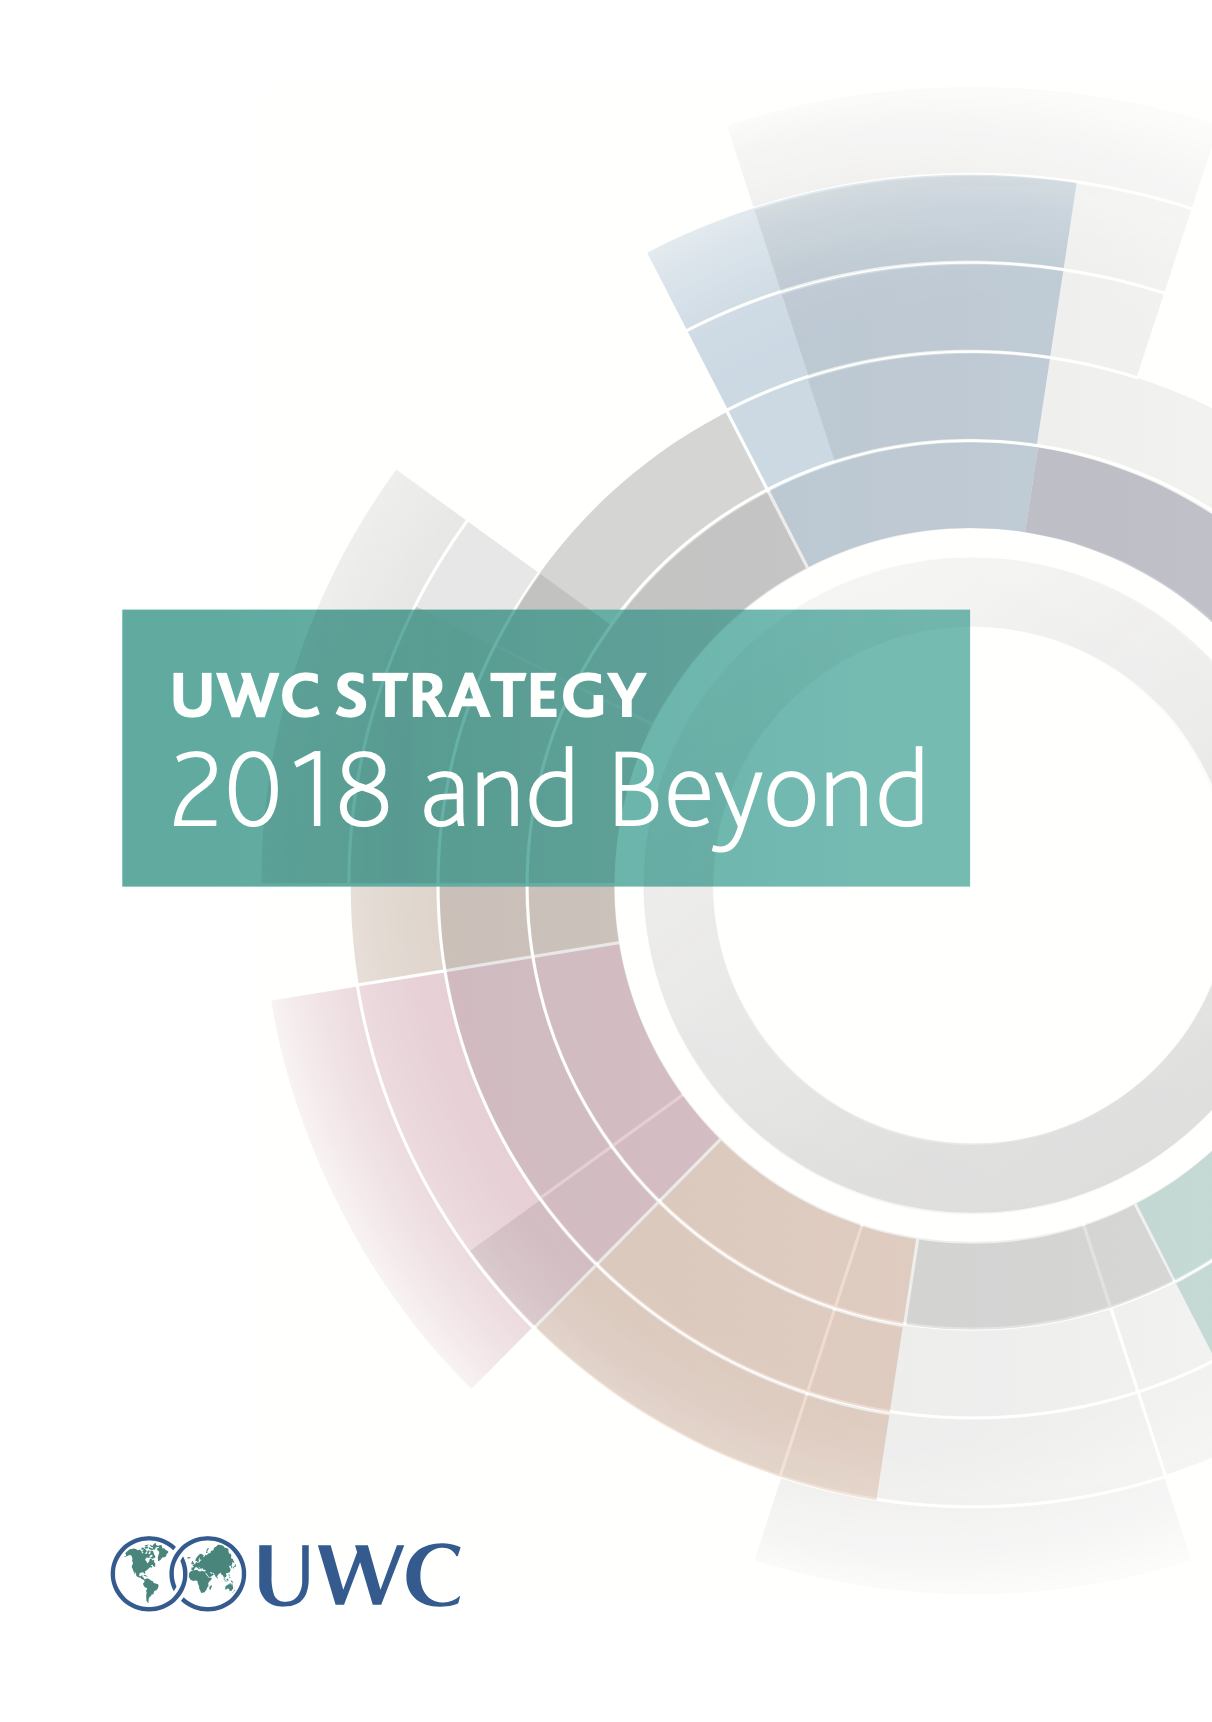 UWC Strategy - 2018 and Beyond